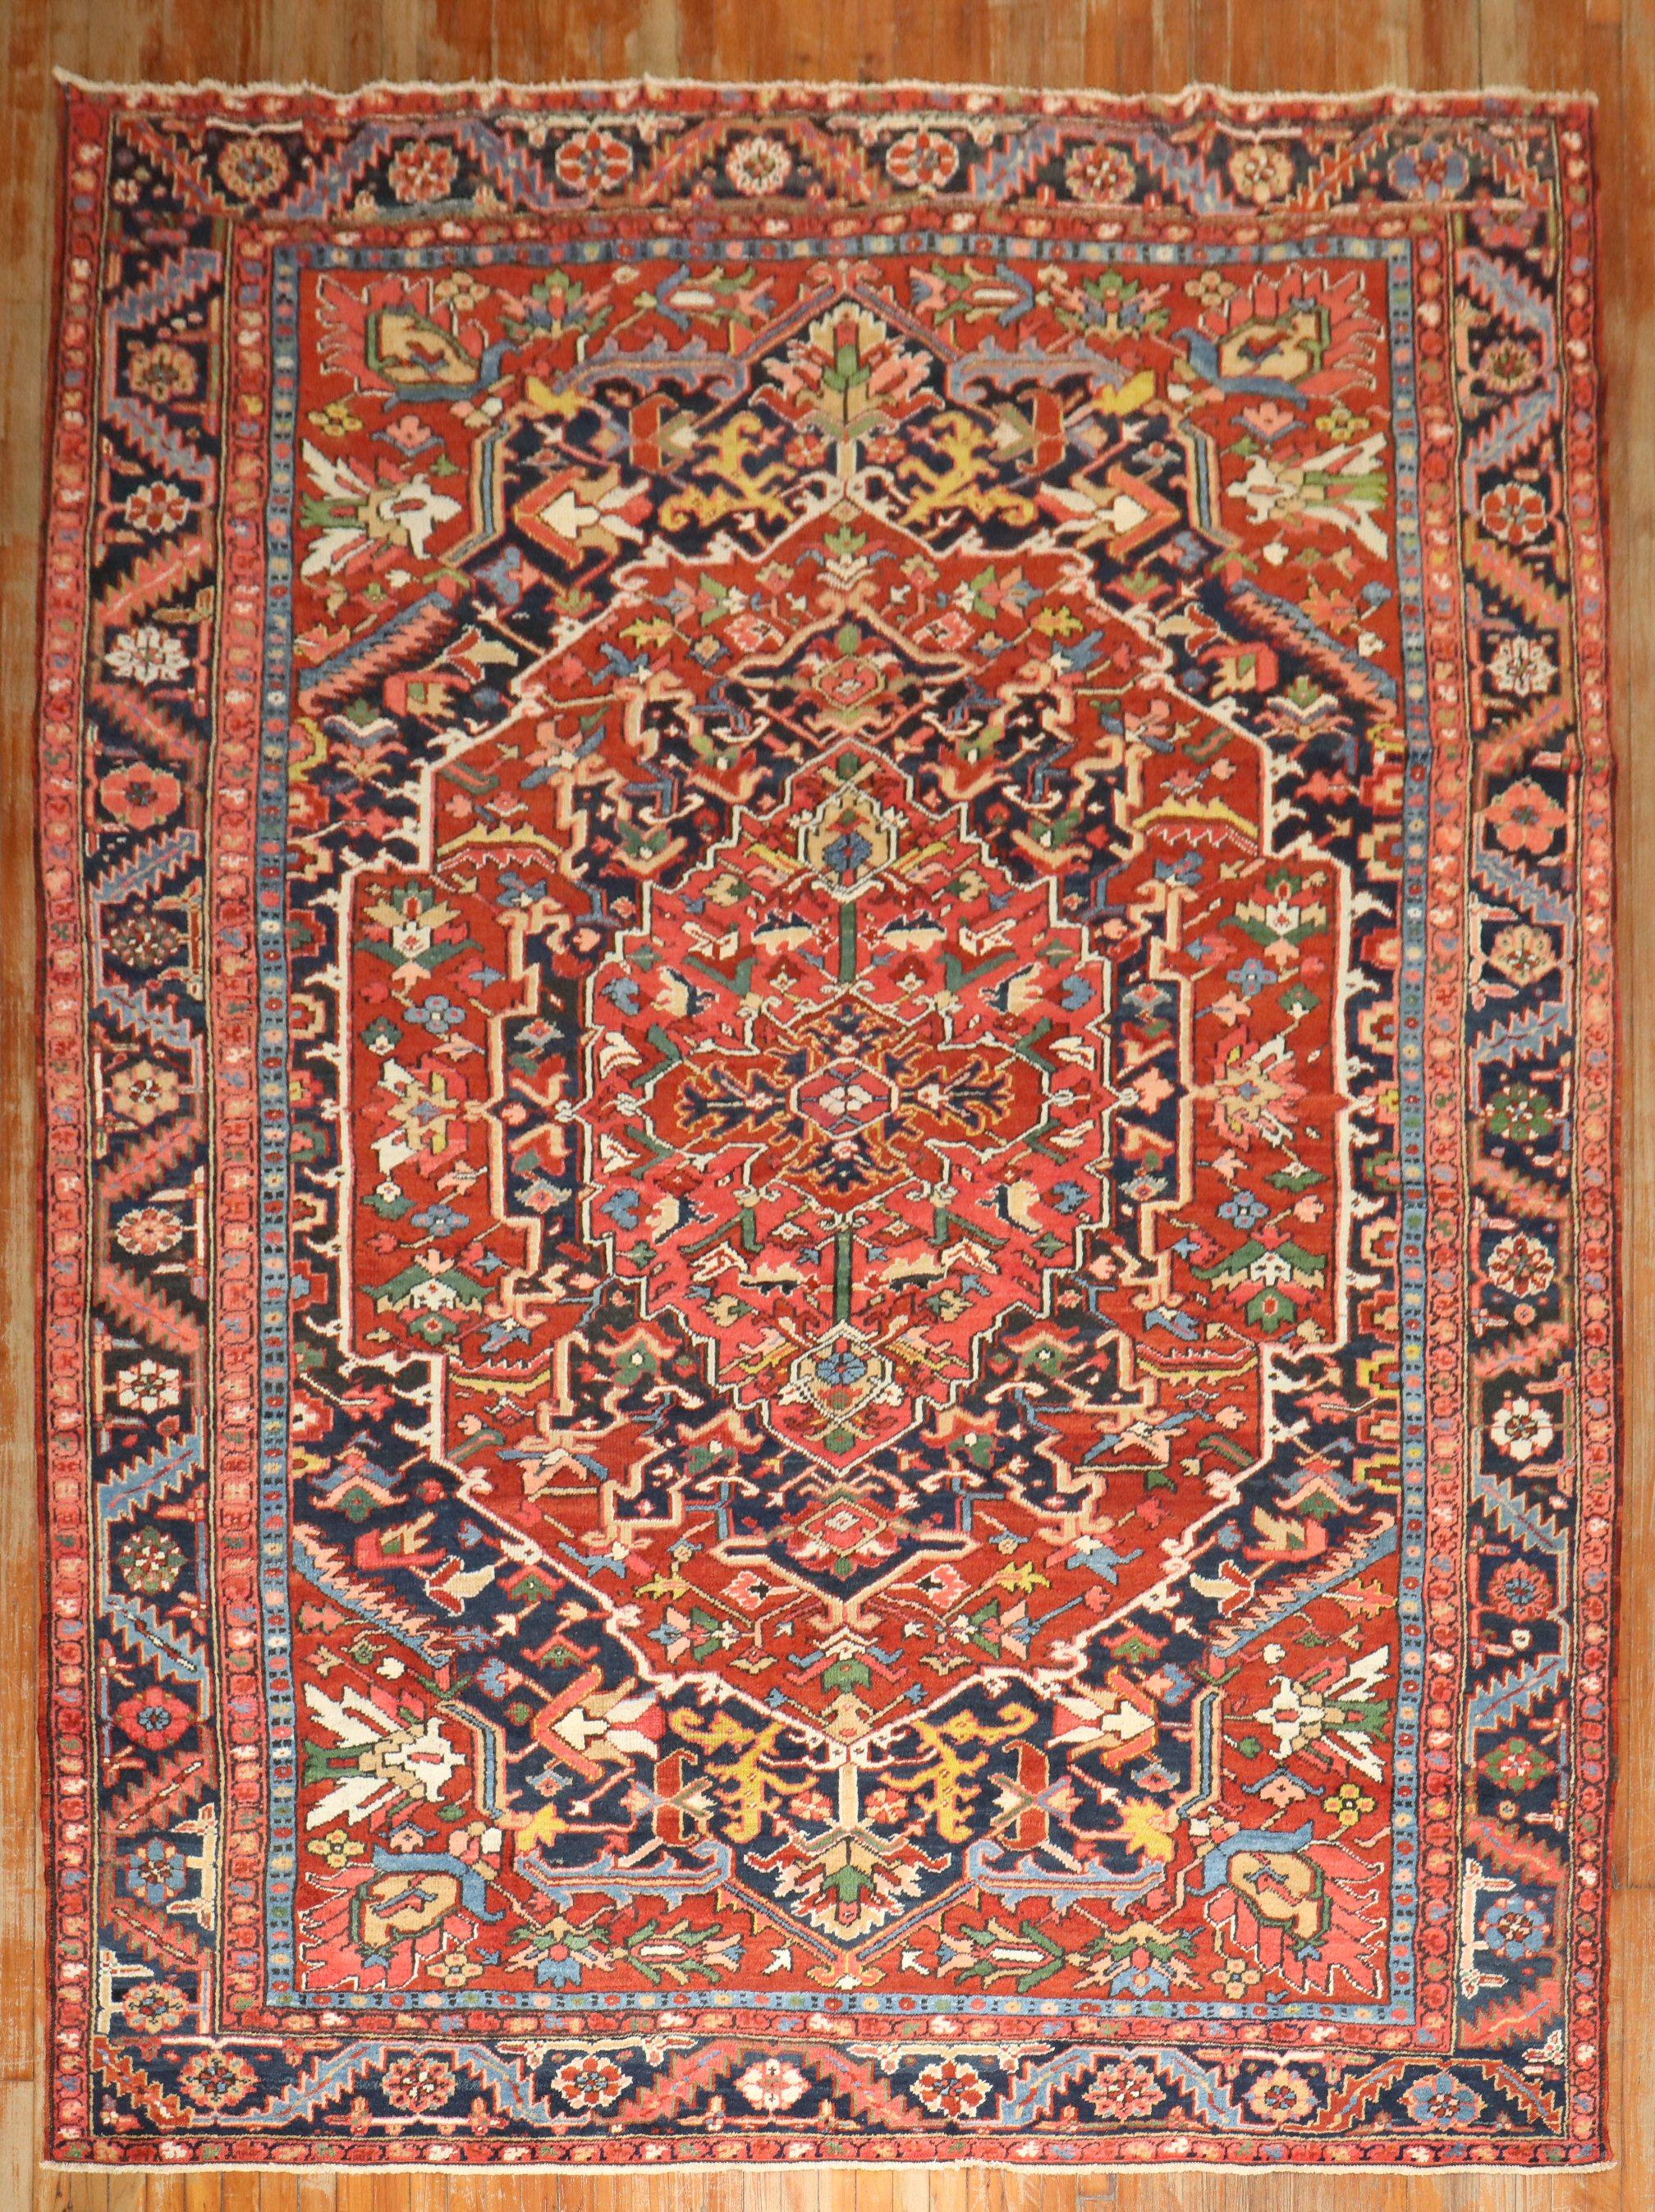 Wonderful high decorative antique Room size Persian Heriz Rug from the 1st quarter of the 20th century

8'1'' x 10'10''

The finest antique Persian Heriz rugs are geometric in design with open spacious patterns invibrant colors. The great majority